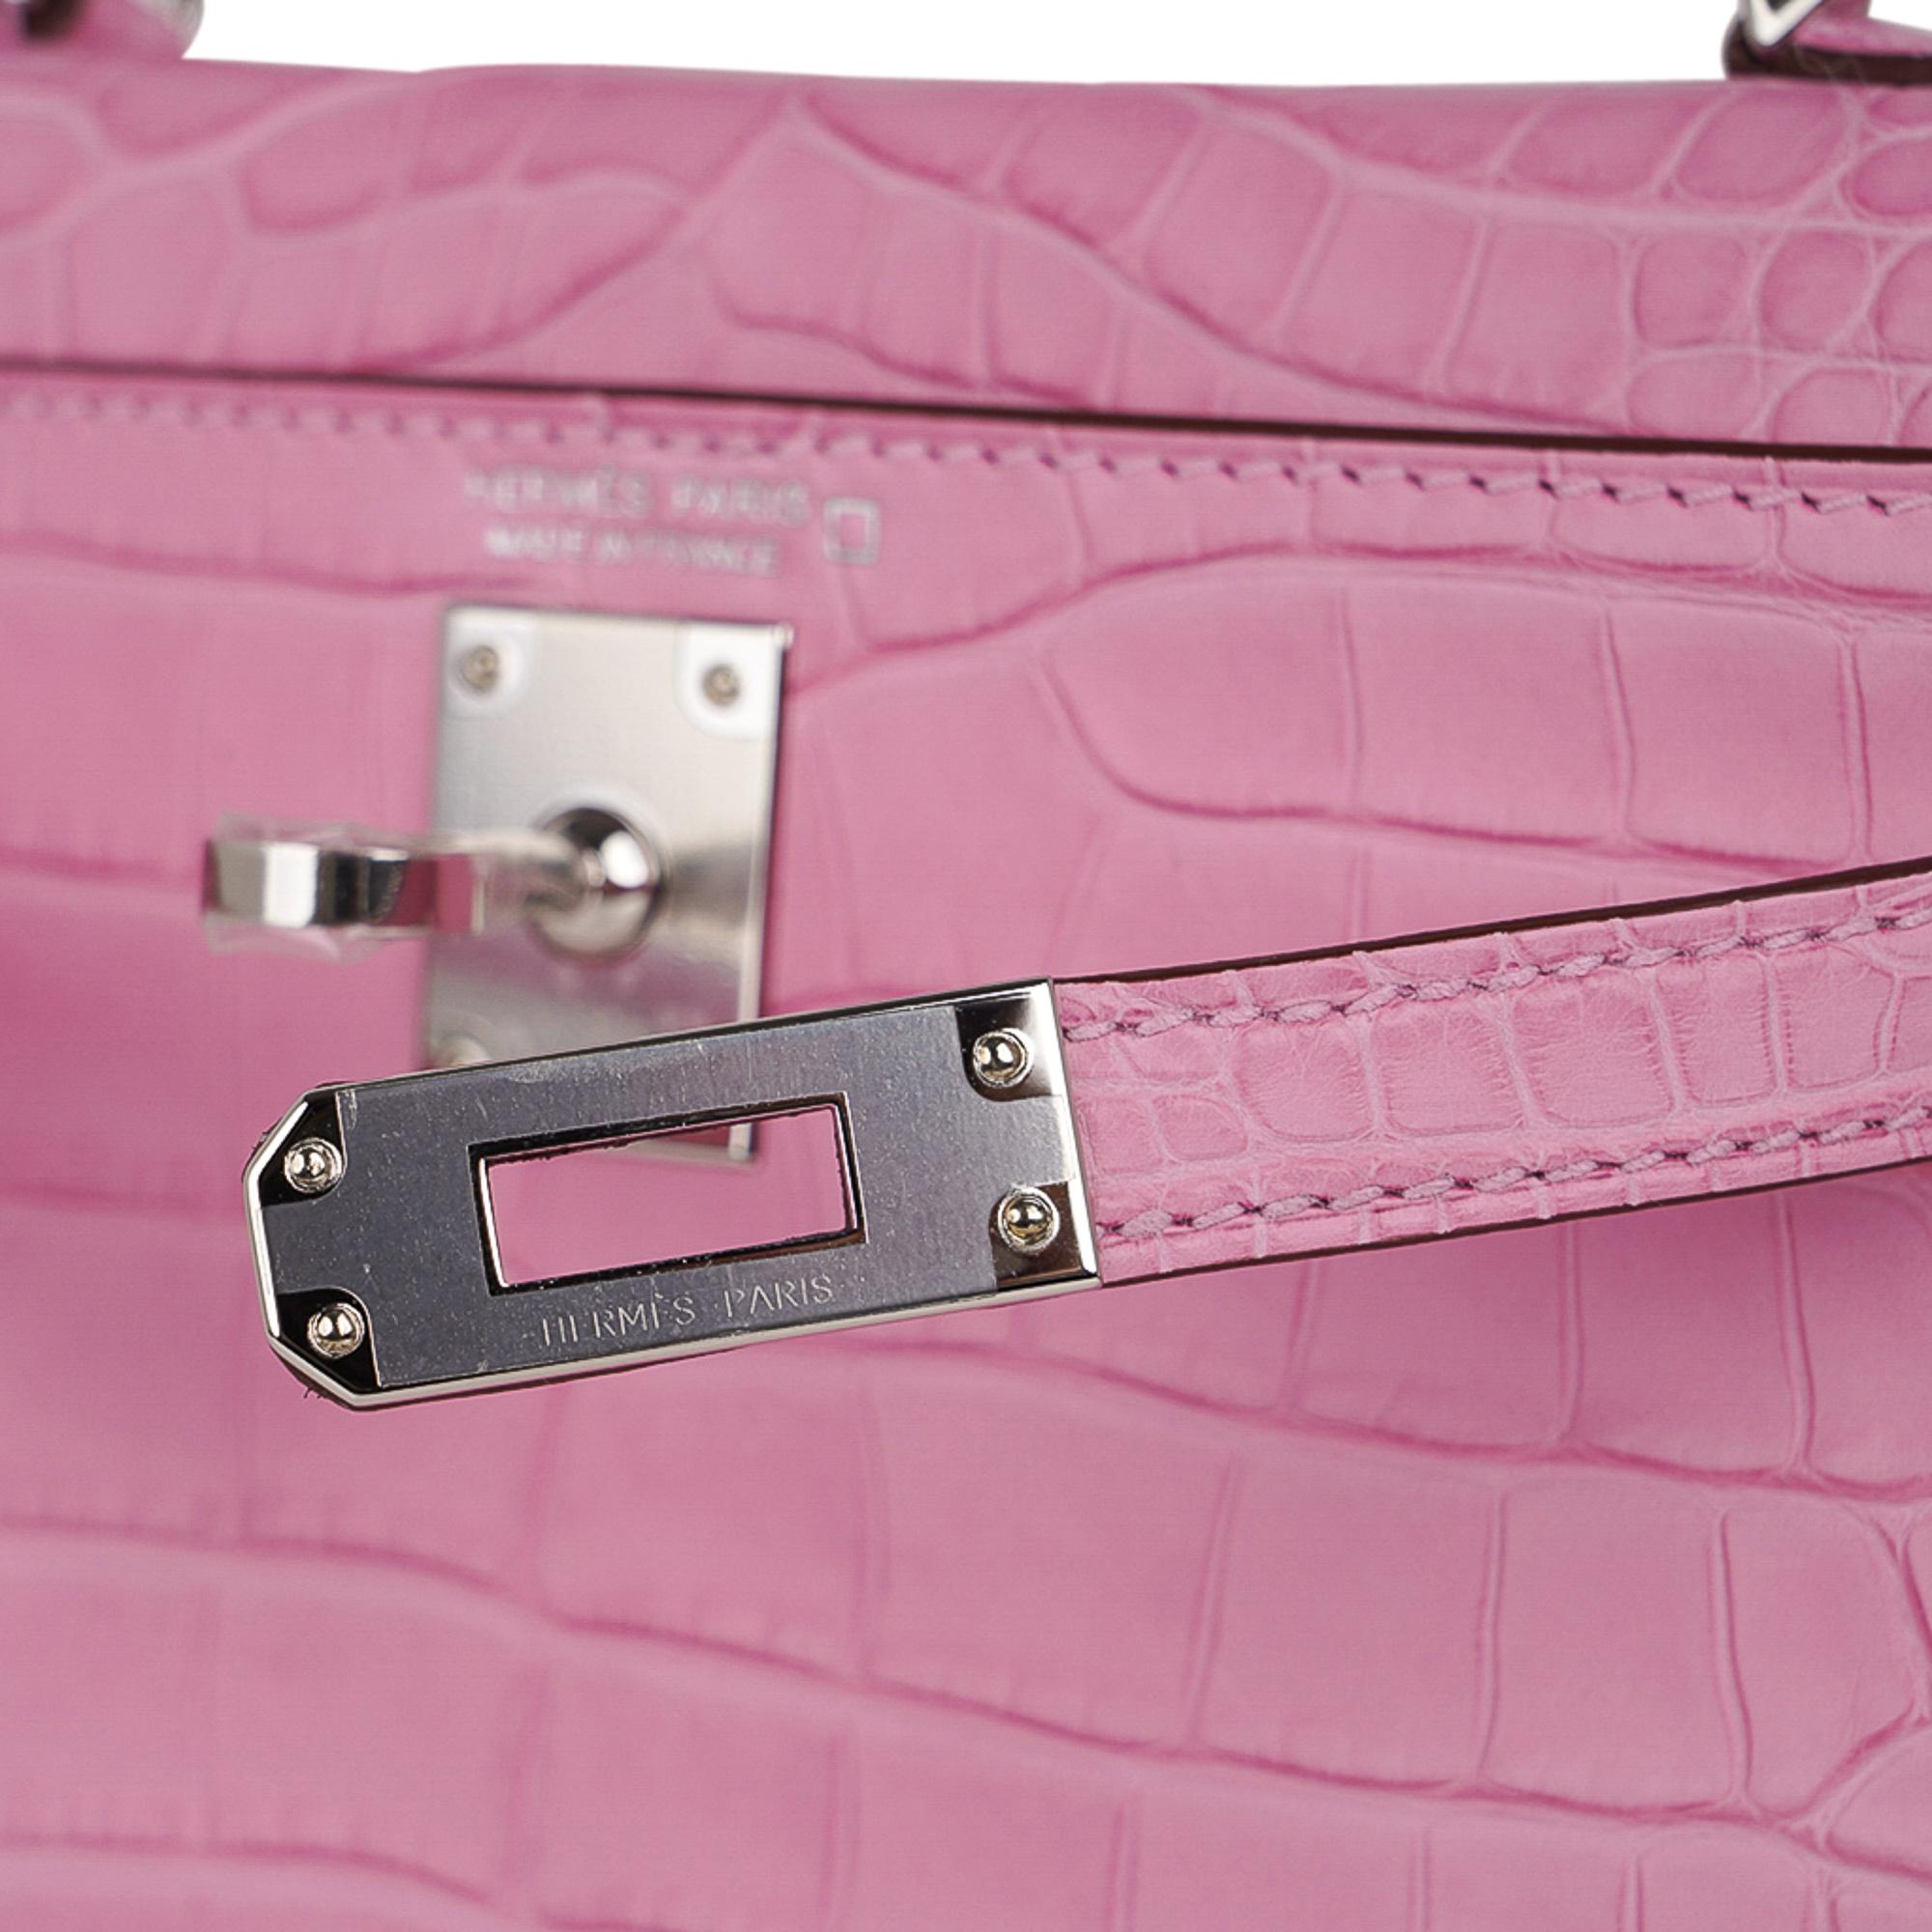 Mightychic offers a guaranteed authentic Limited Edition Hermes Kelly 20 Mini Sellier bag featured 
in coveted unircorn 5P Pink matte Alligator.
Fresh with palladium hardware.
The Kelly 20 bag in alligator is extremely limited and difficult to